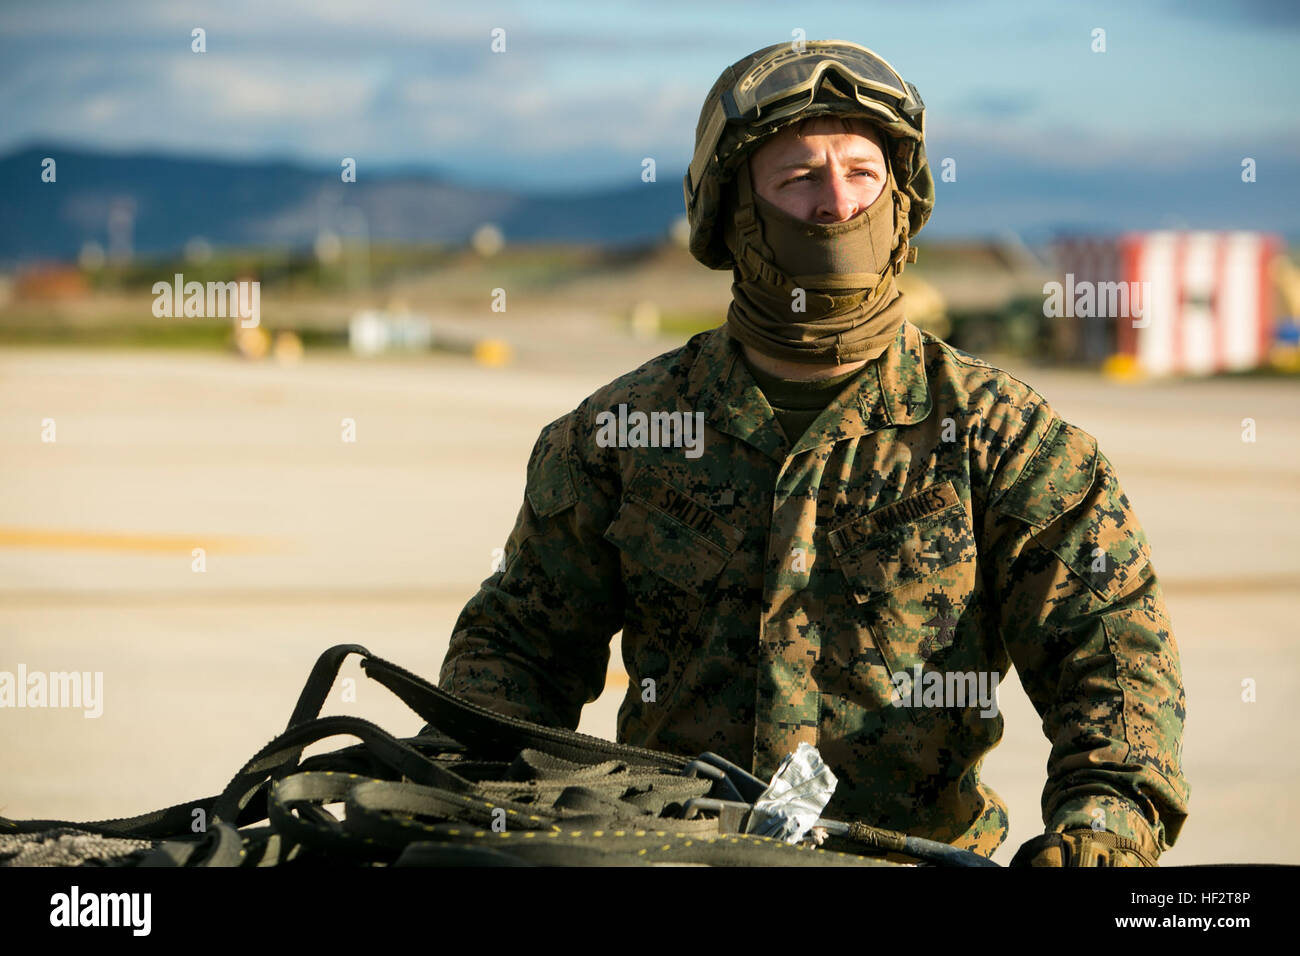 Lance Cpl. Derek Smith, a landing support specialist with Special-Purpose Marine Air-Ground Task Force Crisis Response-Africa, stands on the flight line at Morón Air Base, Spain, during an external-lift drill with the MV-22 Osprey Jan. 19, 2015. Smith worked with a team of landing support specialists to connect a 2180-pound pallet to the lift-cable of an Osprey. (U.S. Marine Corps photo by Sgt. Paul Peterson) Embracing the Whirlwind, Crisis Response Marines hone heavy-lift capabilities in Spain 150119-M-ZB219-333 Stock Photo